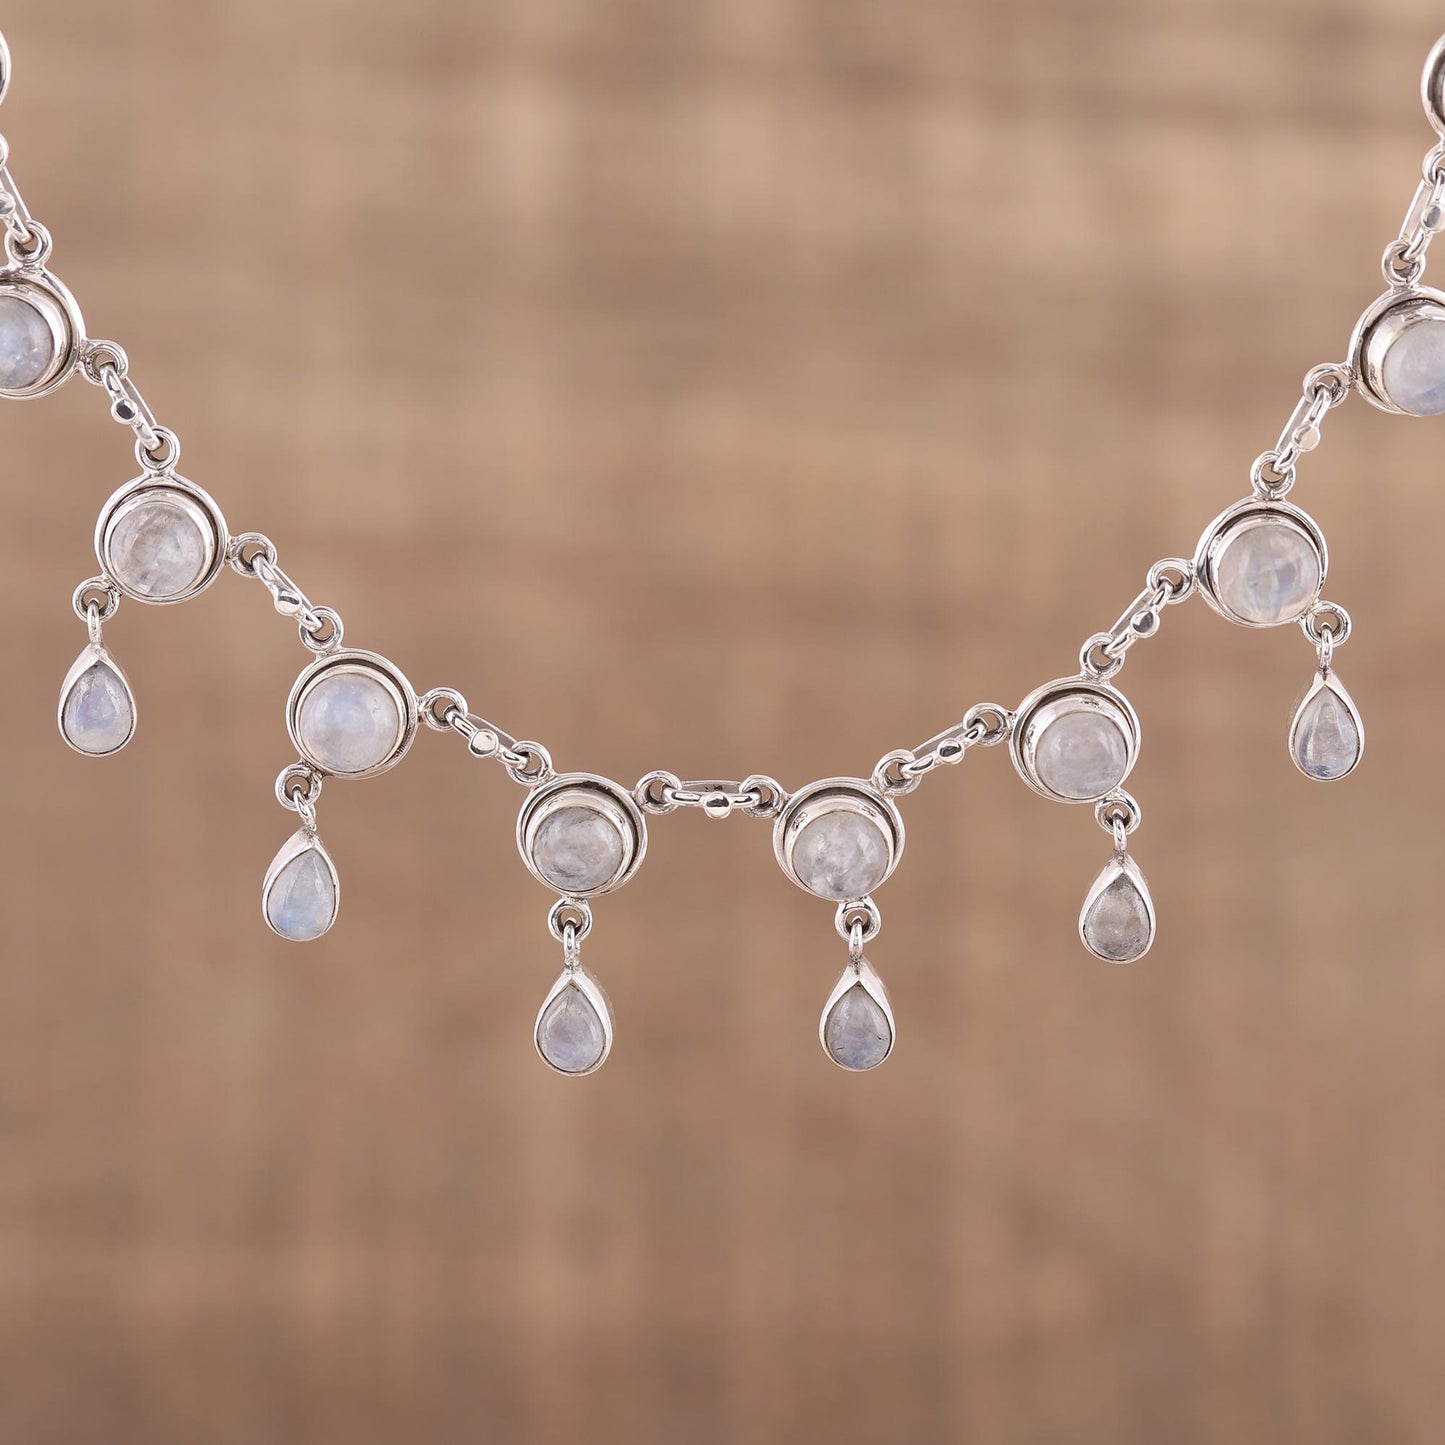 Shimmer Moonstone Waterfall Necklace